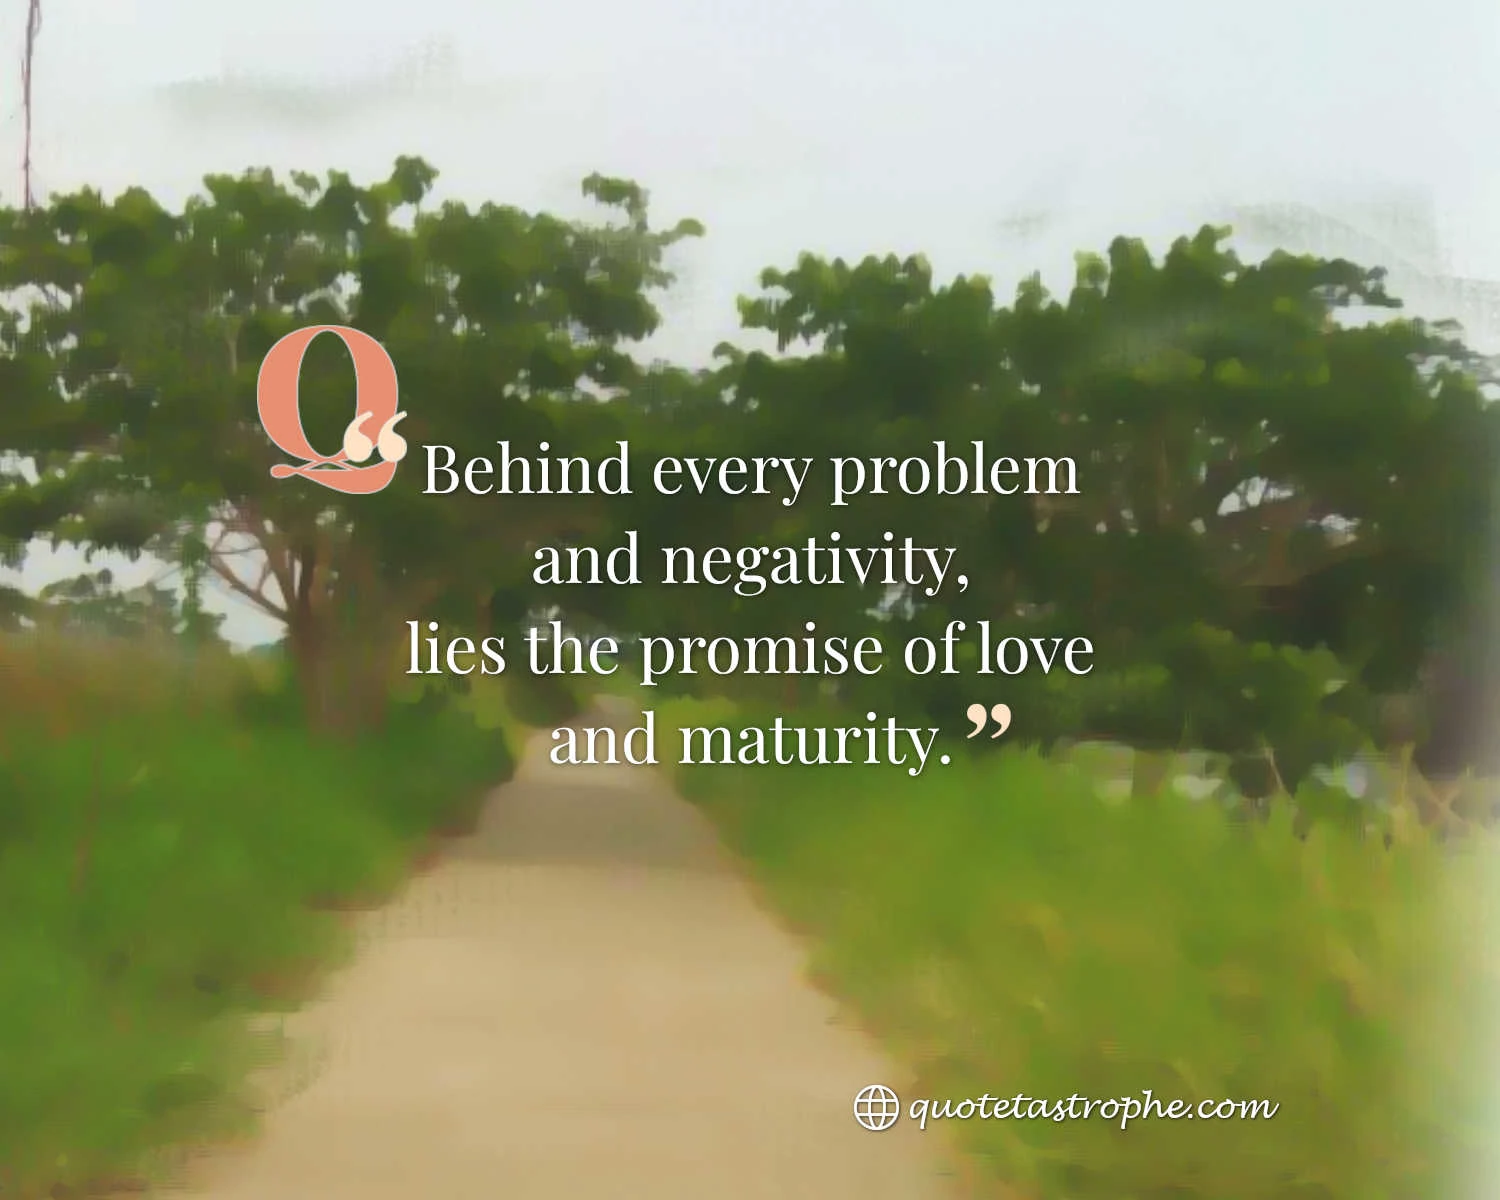 Behind Every Problem and Negativity